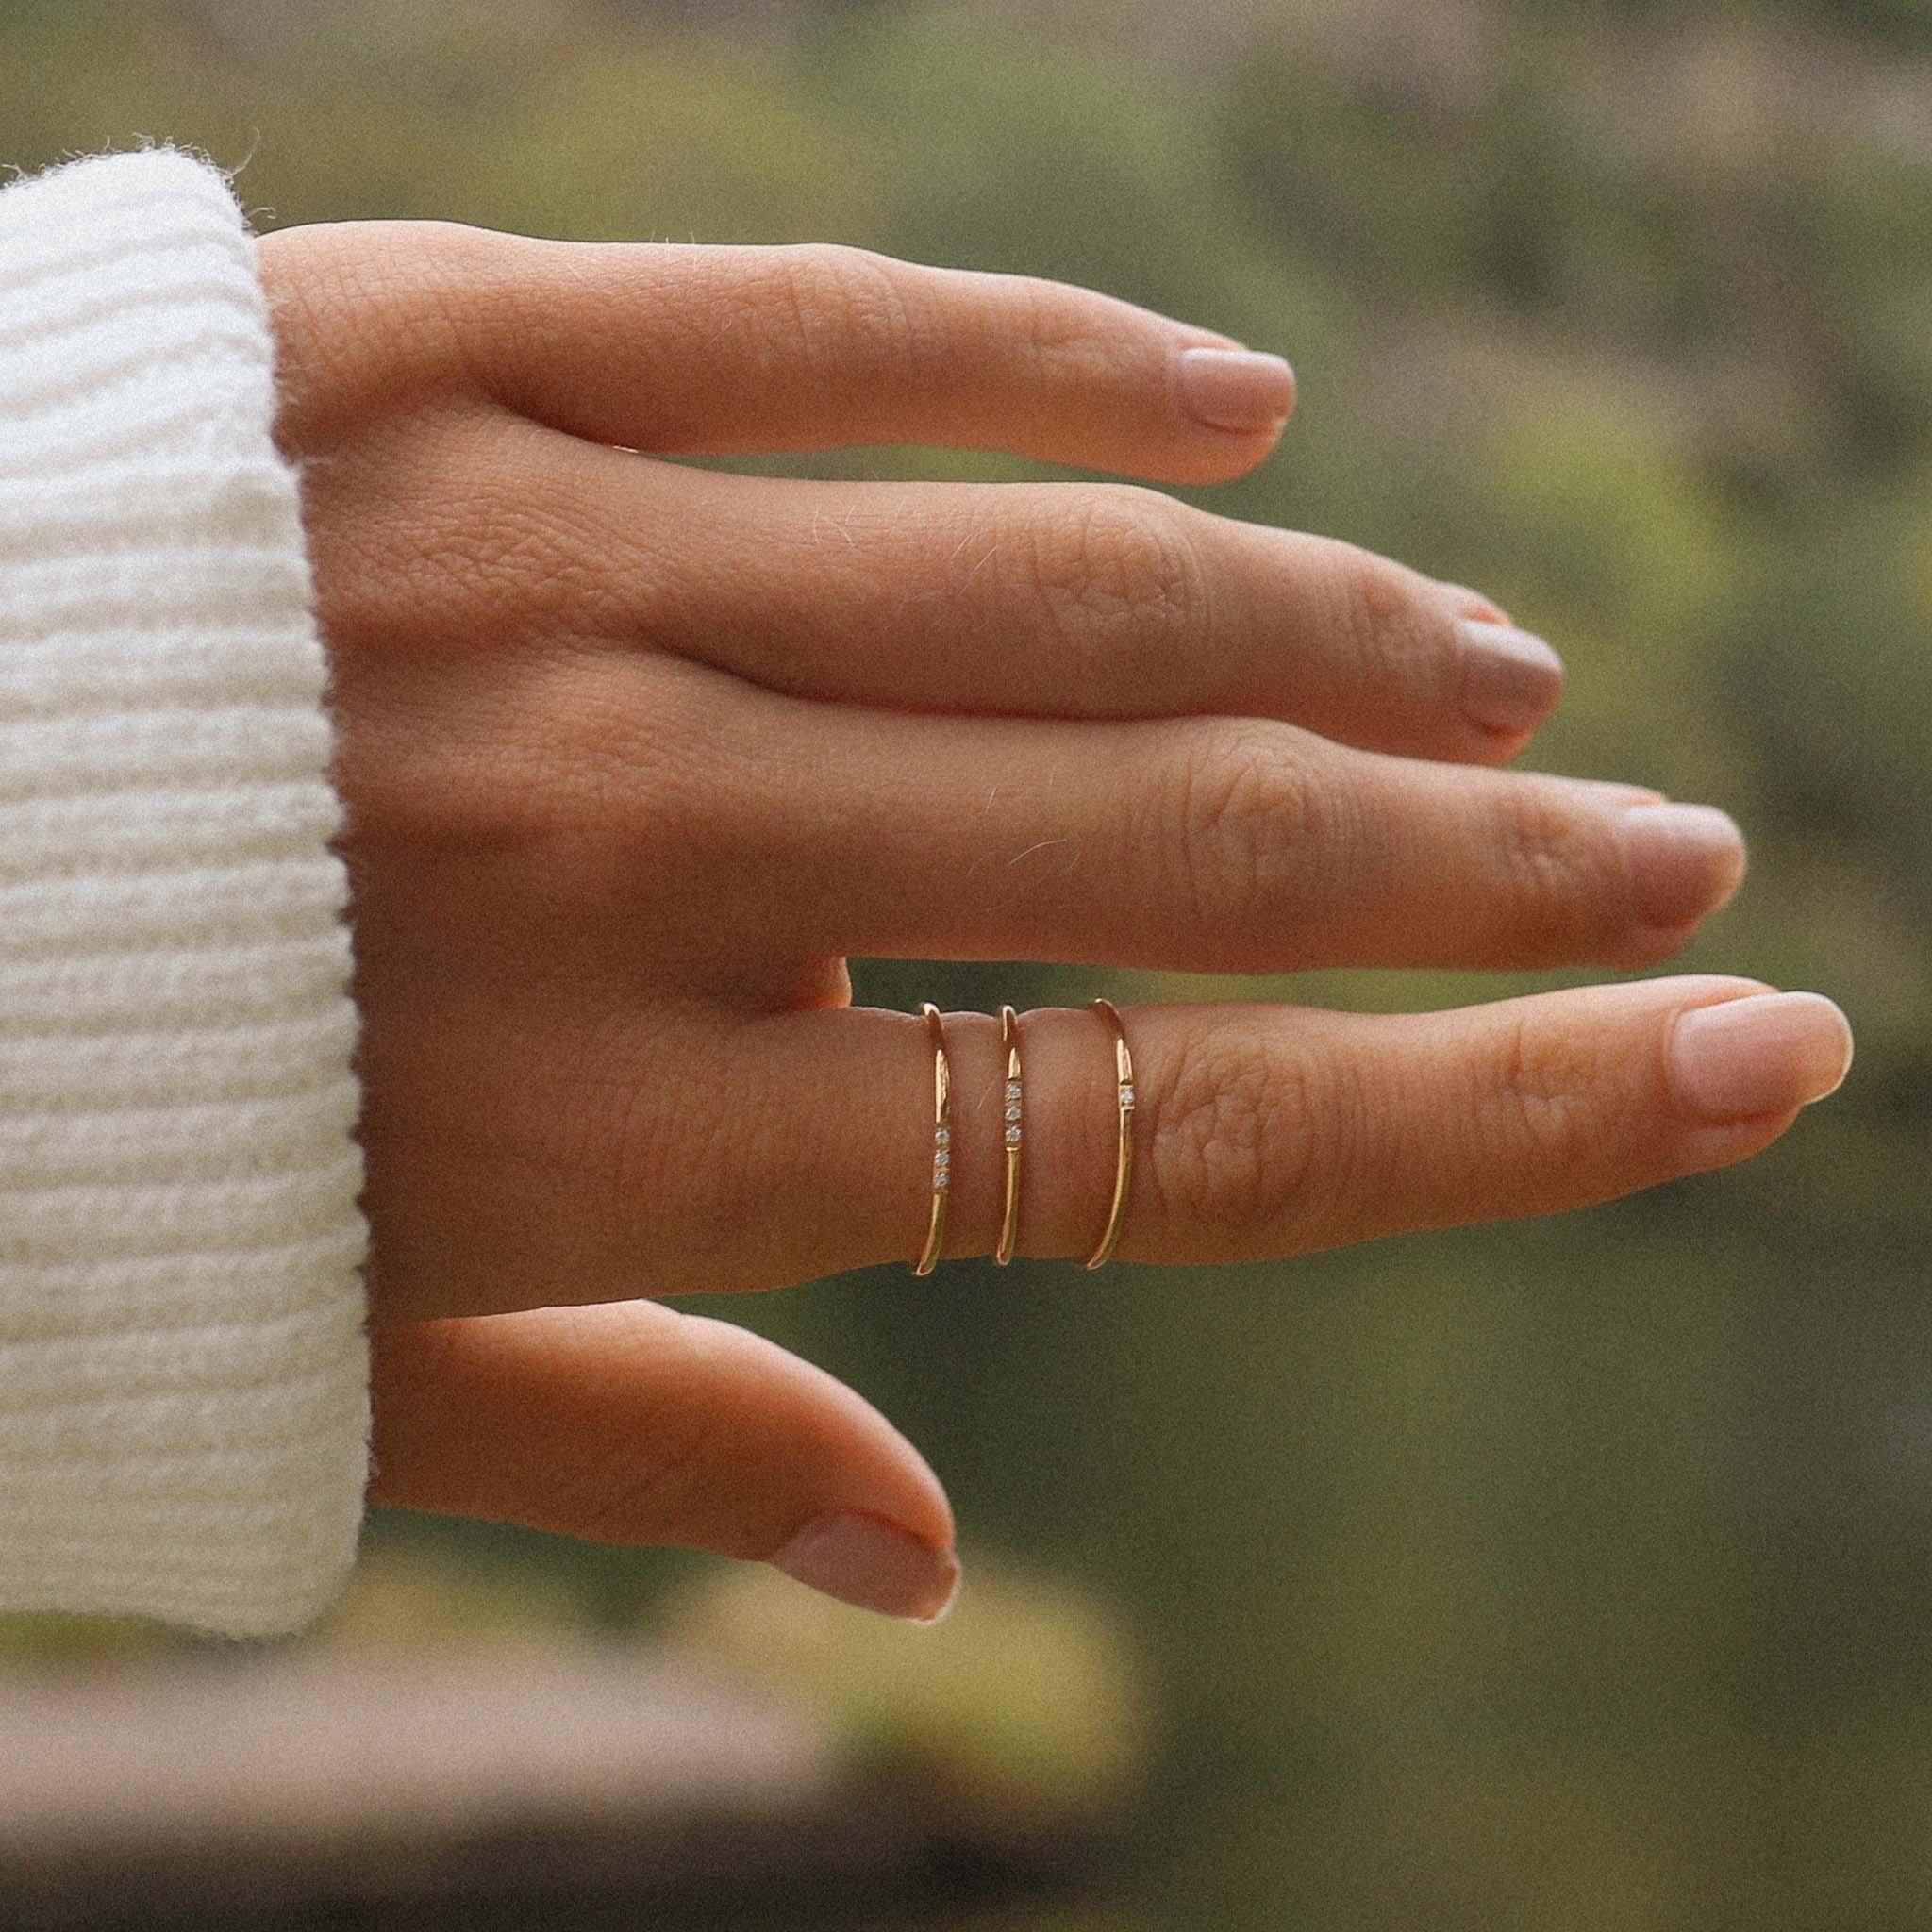 Wrenley Stacking Ring - womens jewellery by indie and harper